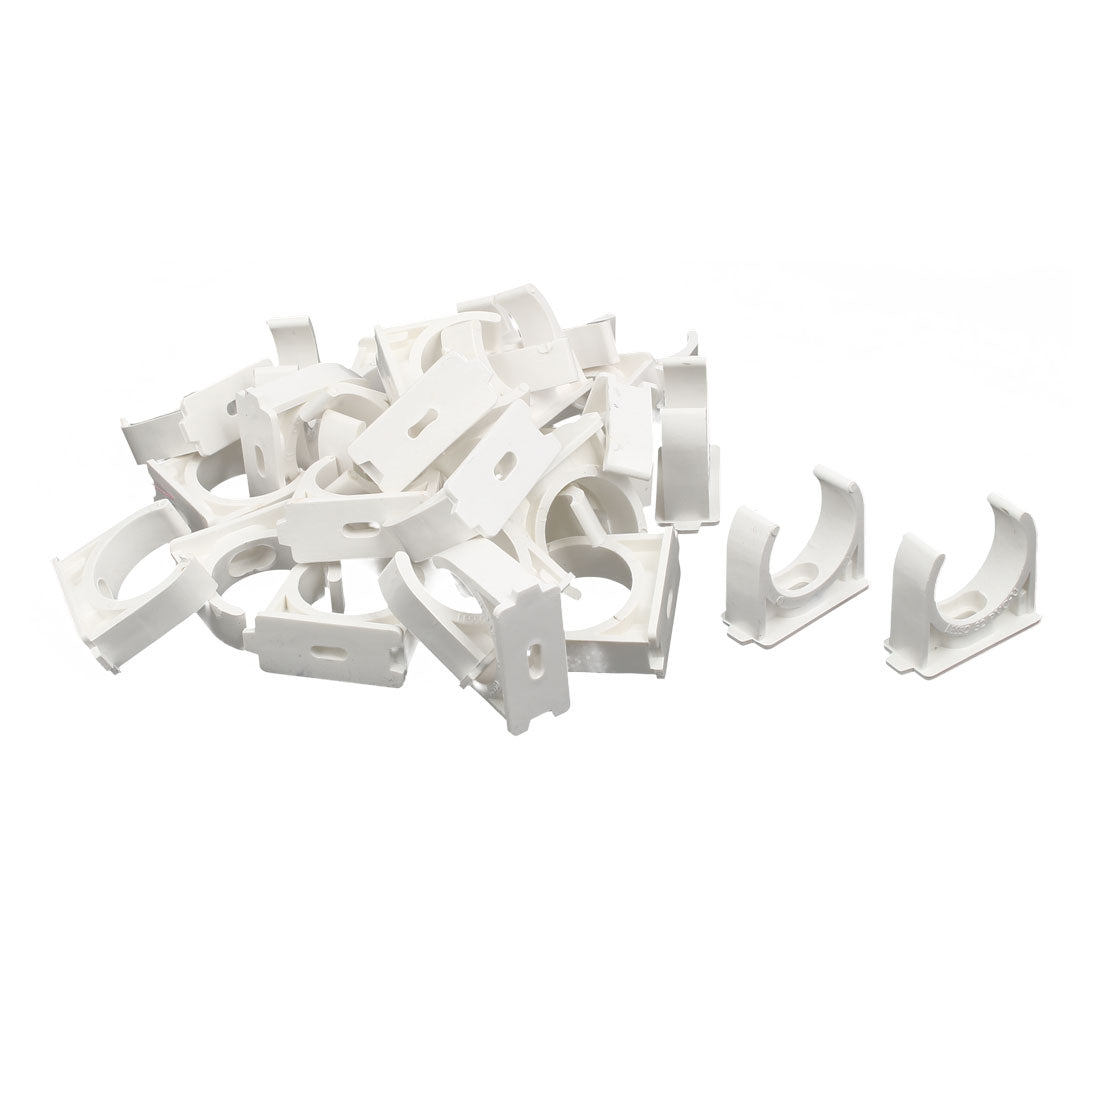 uxcell Uxcell 32mm Dia Plastic PVC Water Tube Pipe Hose Clips Clamps Holders White 30pcs